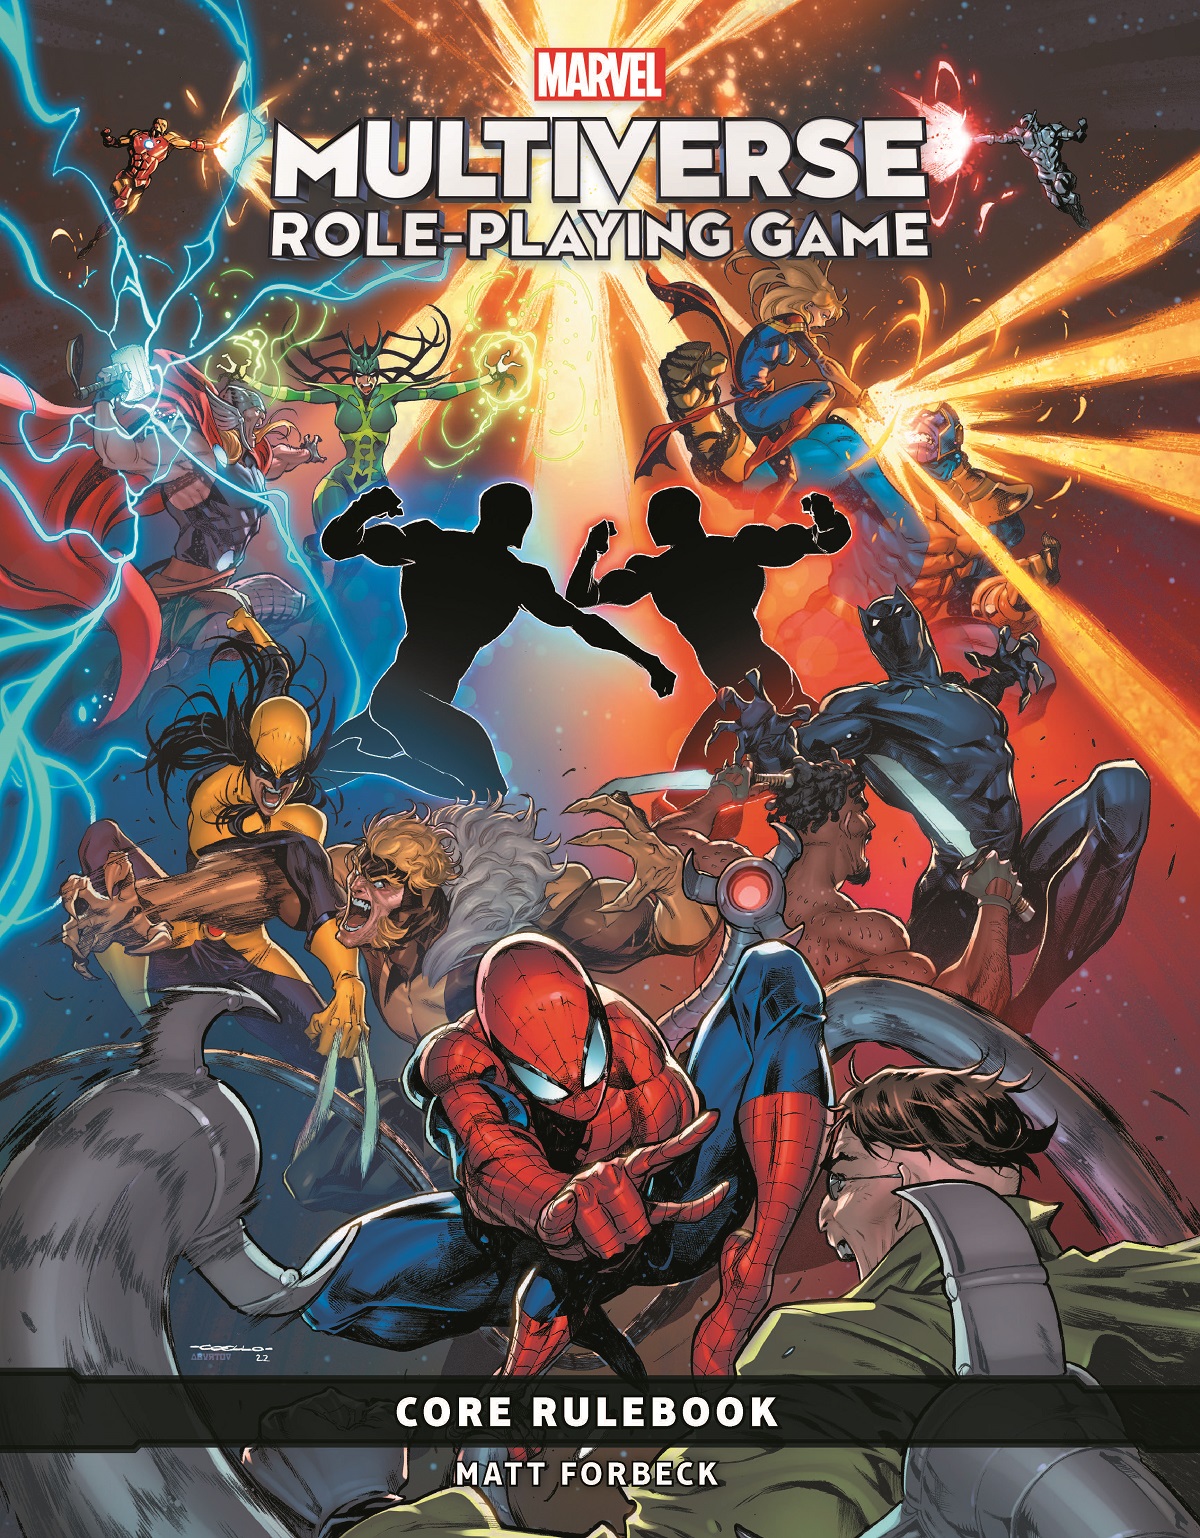 Marvel Multiverse Role-Playing Game: Core Rulebook (Hardcover)